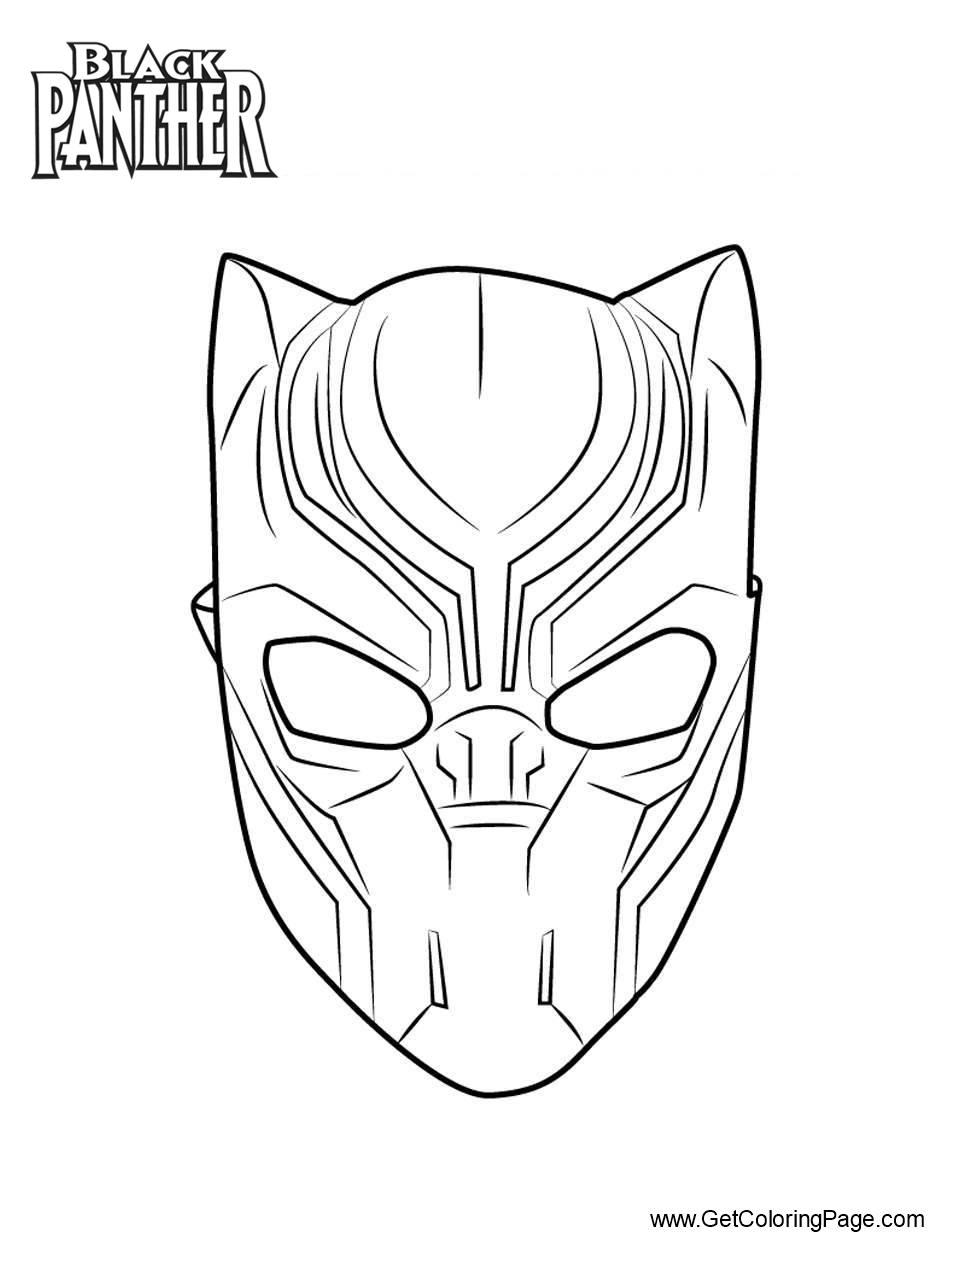 Black Panther Coloring Pages Free / A black panther is the melanistic